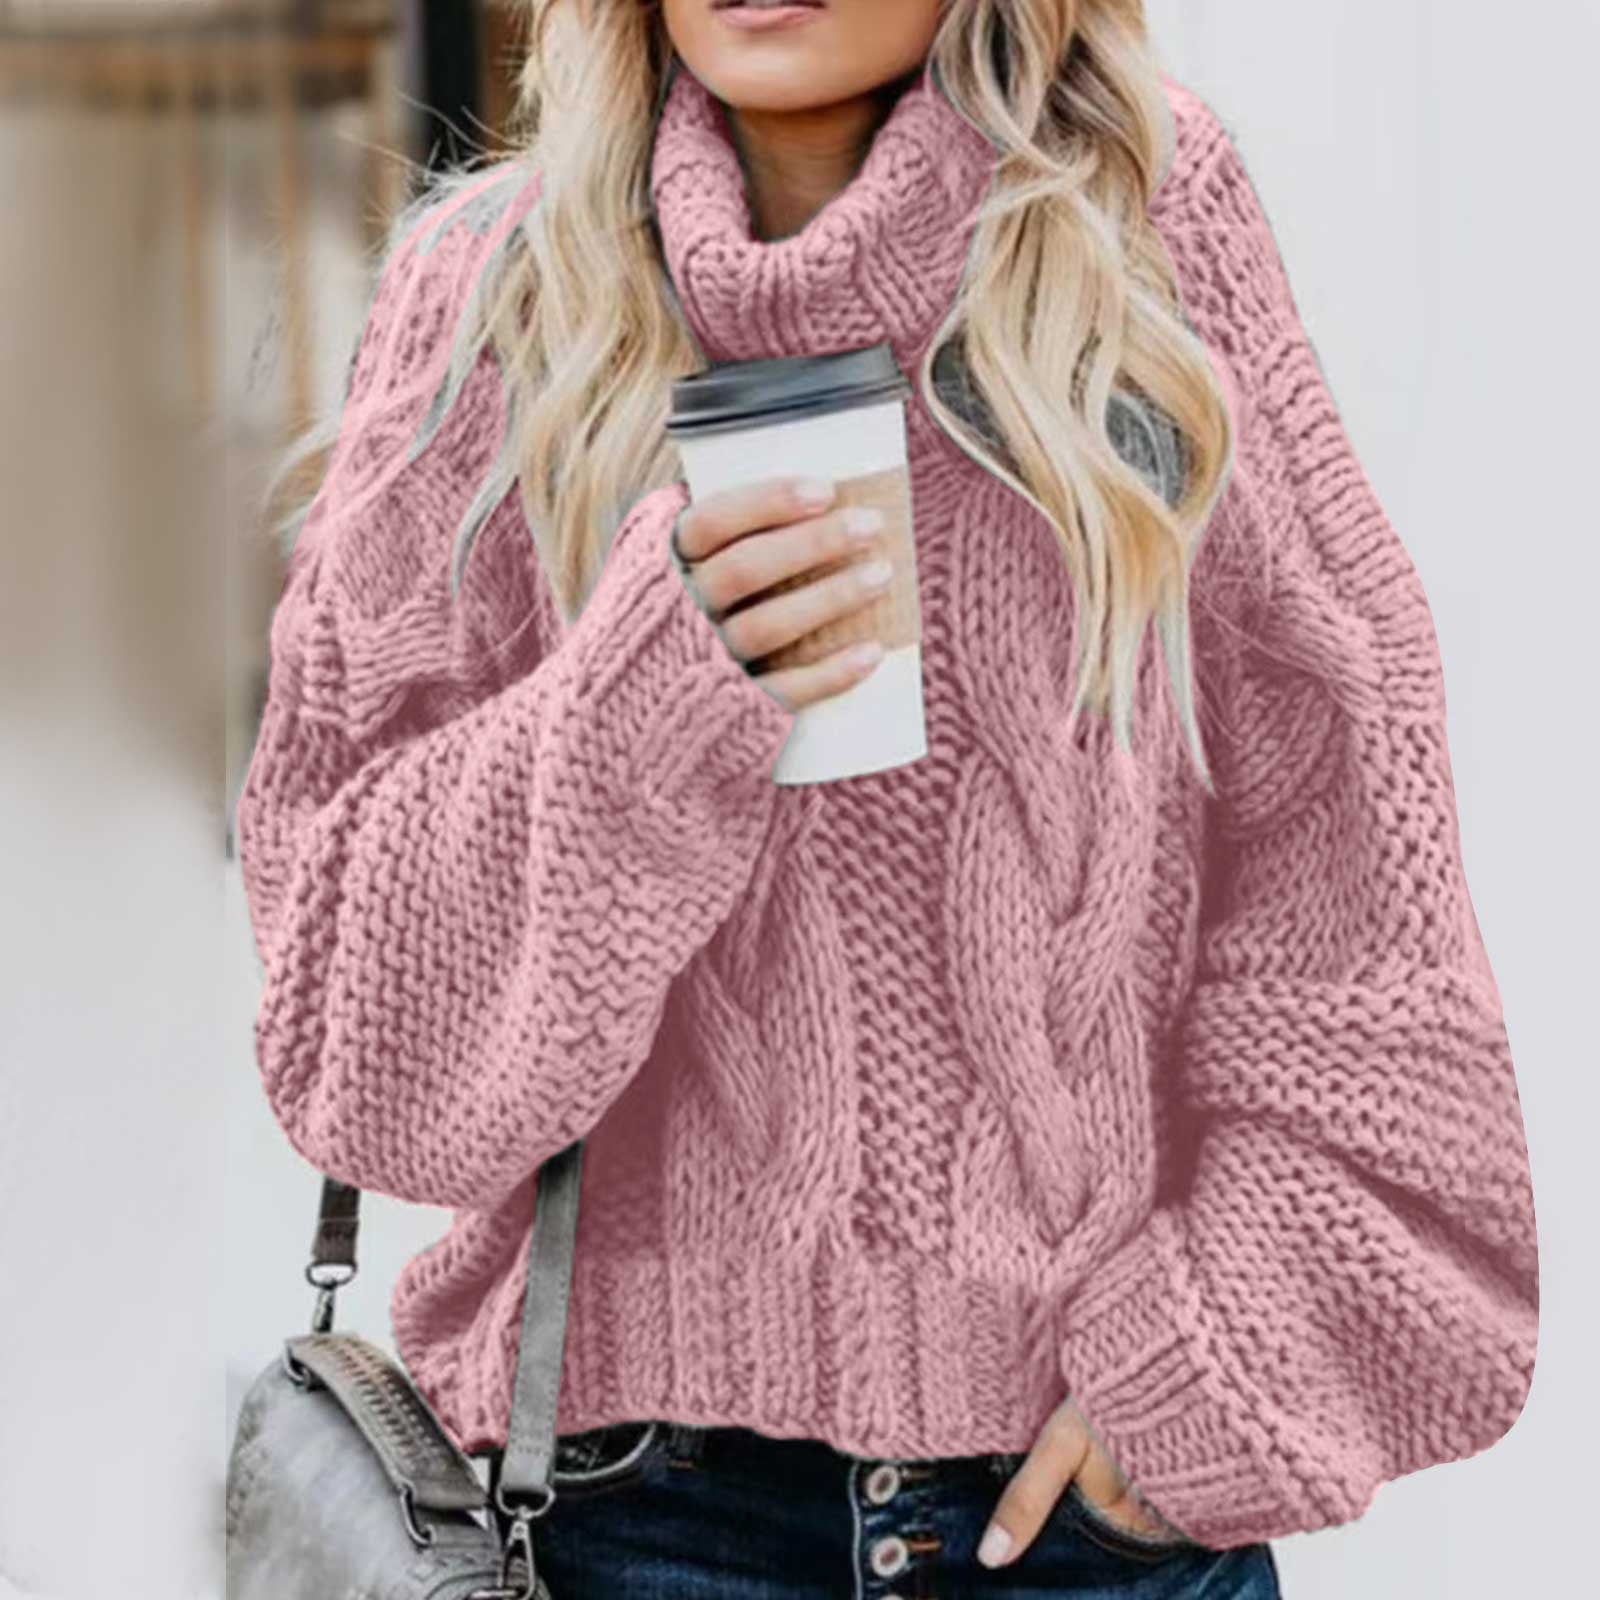 Hfyihgf Casual Knitted Sweater Tops for Women Cable Knit Long